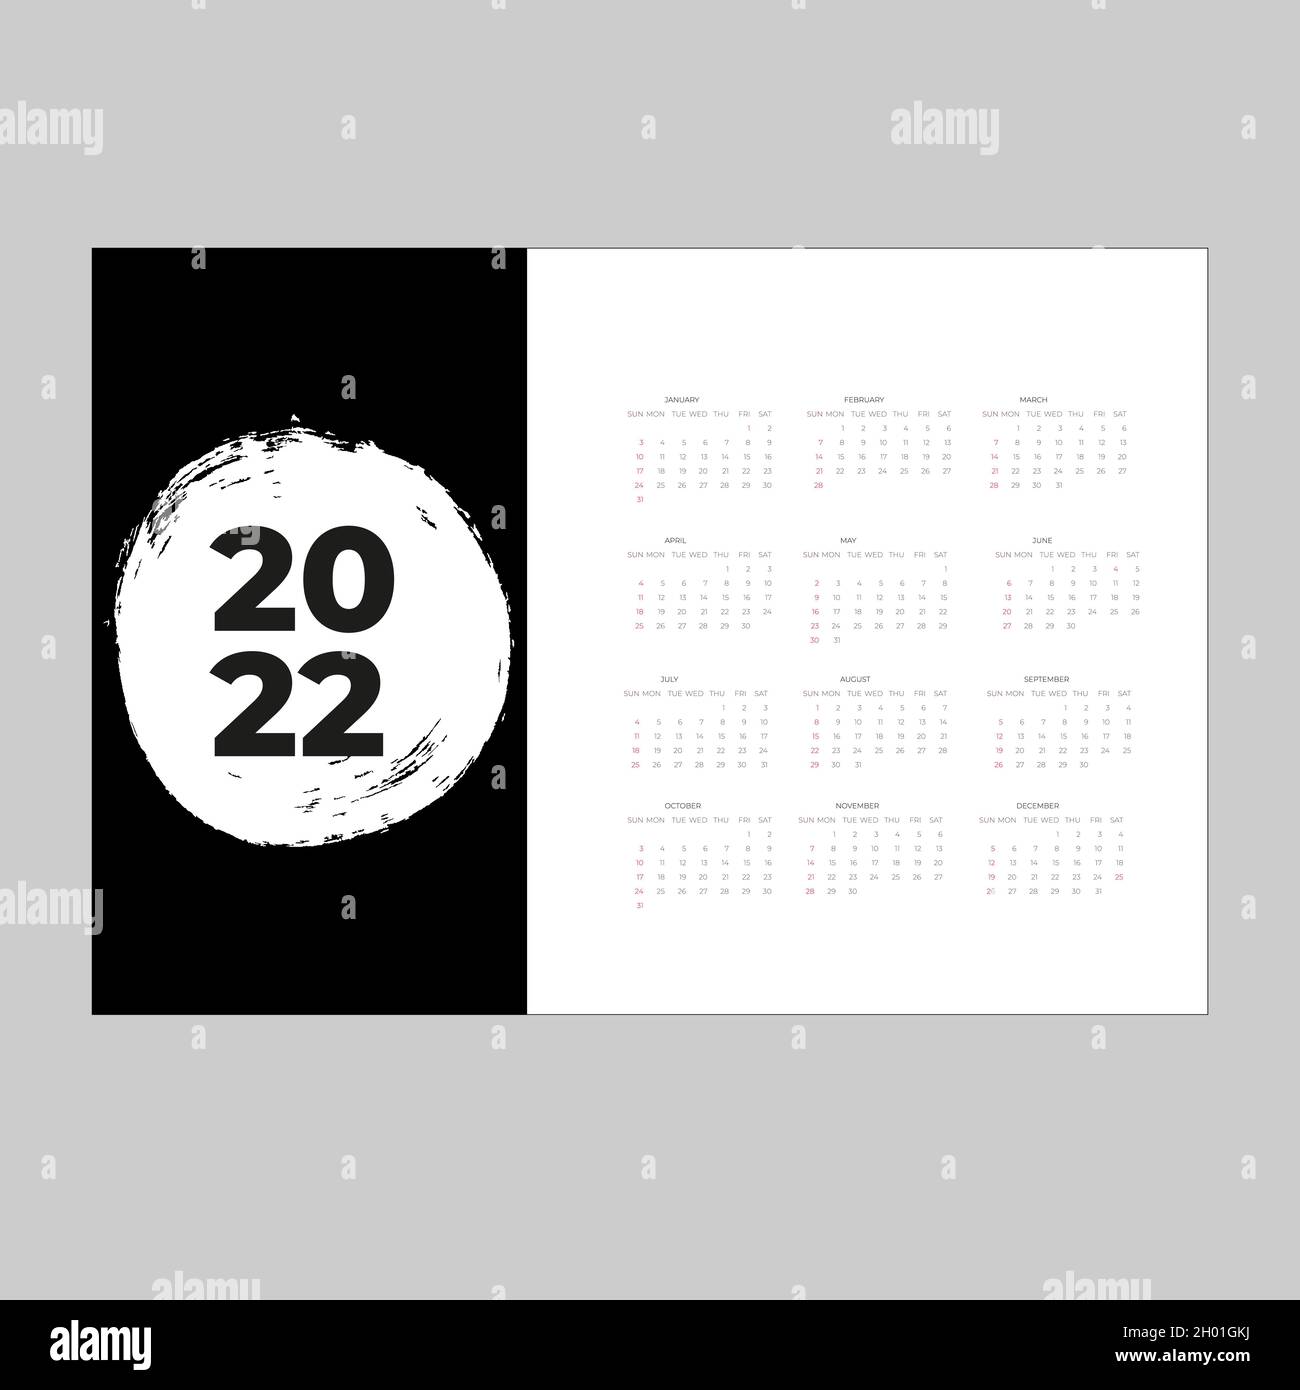 Calendar Template For 2022 Year Planner Diary In A Minimalist Style